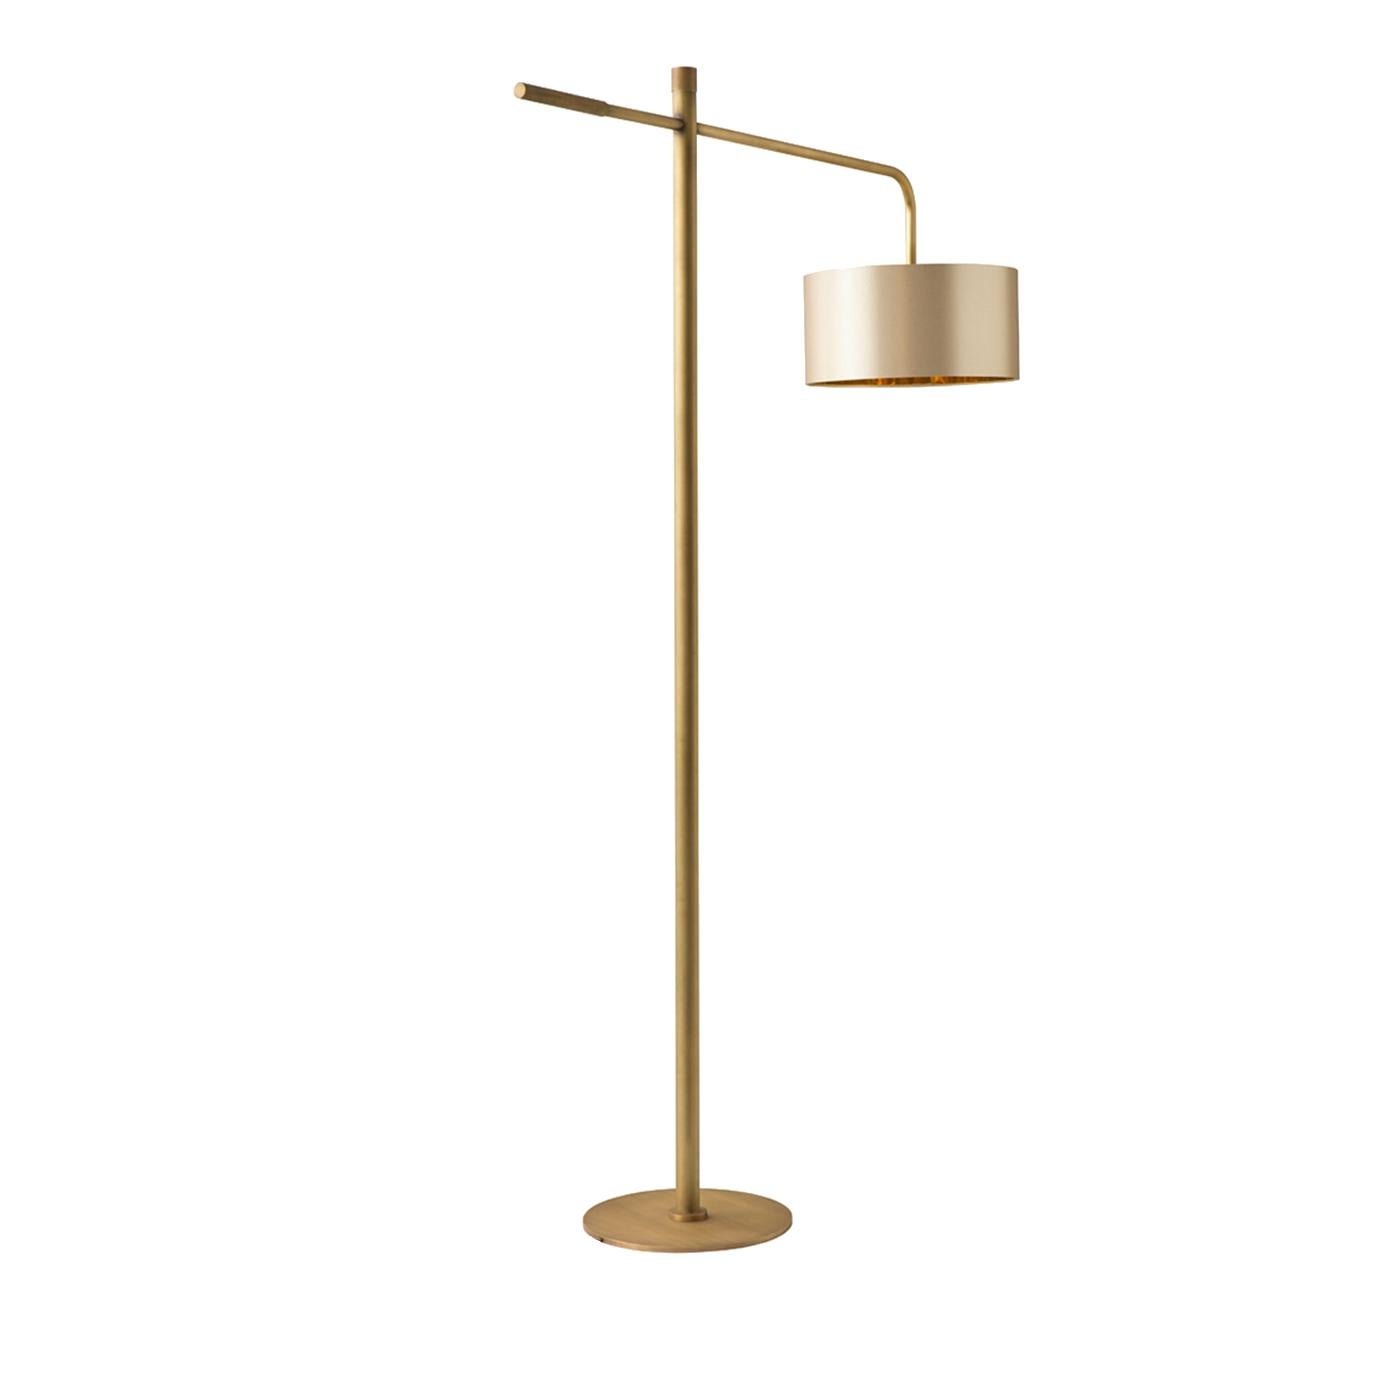 A traditional style gets a chic contemporary makeover in the Gordon floor lamp. On a round, Minimalist base, the floor lamp with a burnished brass finish features a decorative knurled insert and a round drum shade. Thanks to its long arm and